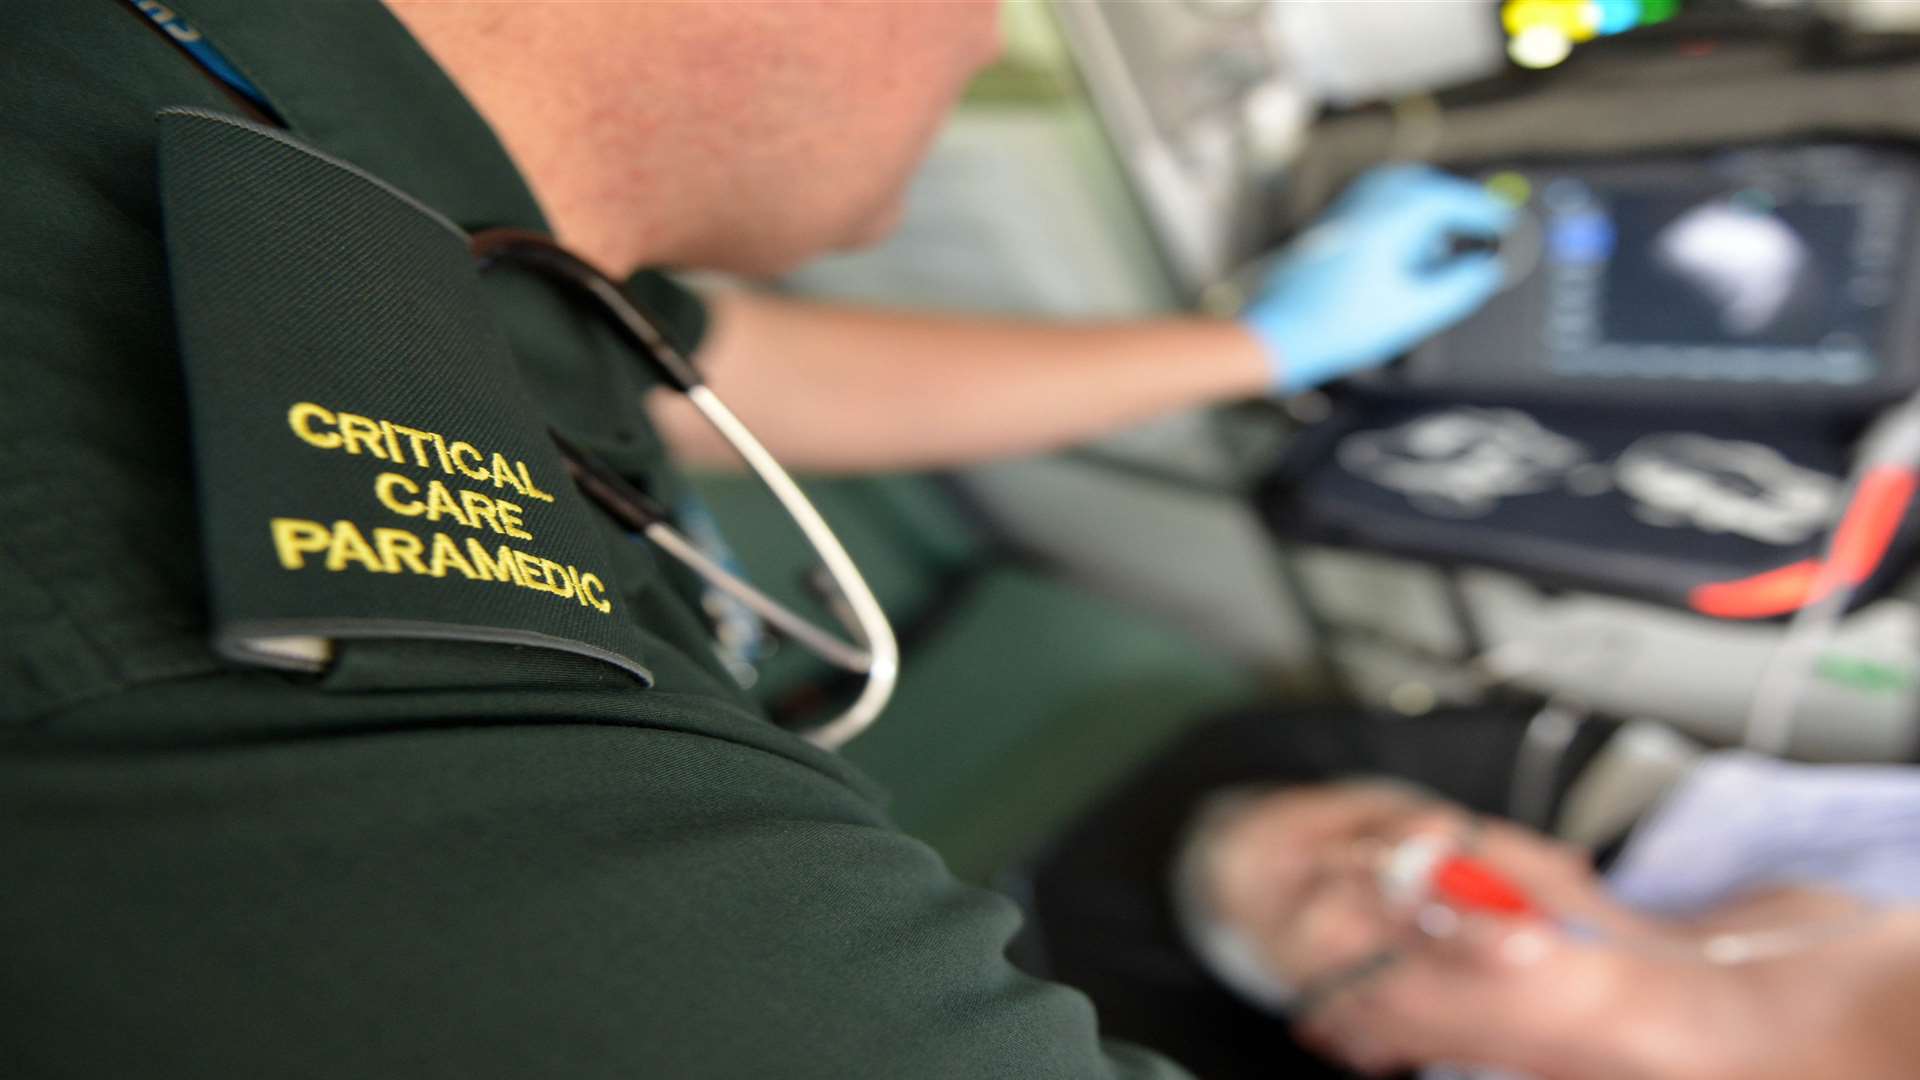 Paramedics help a patient in the back of an ambulance. Stock image